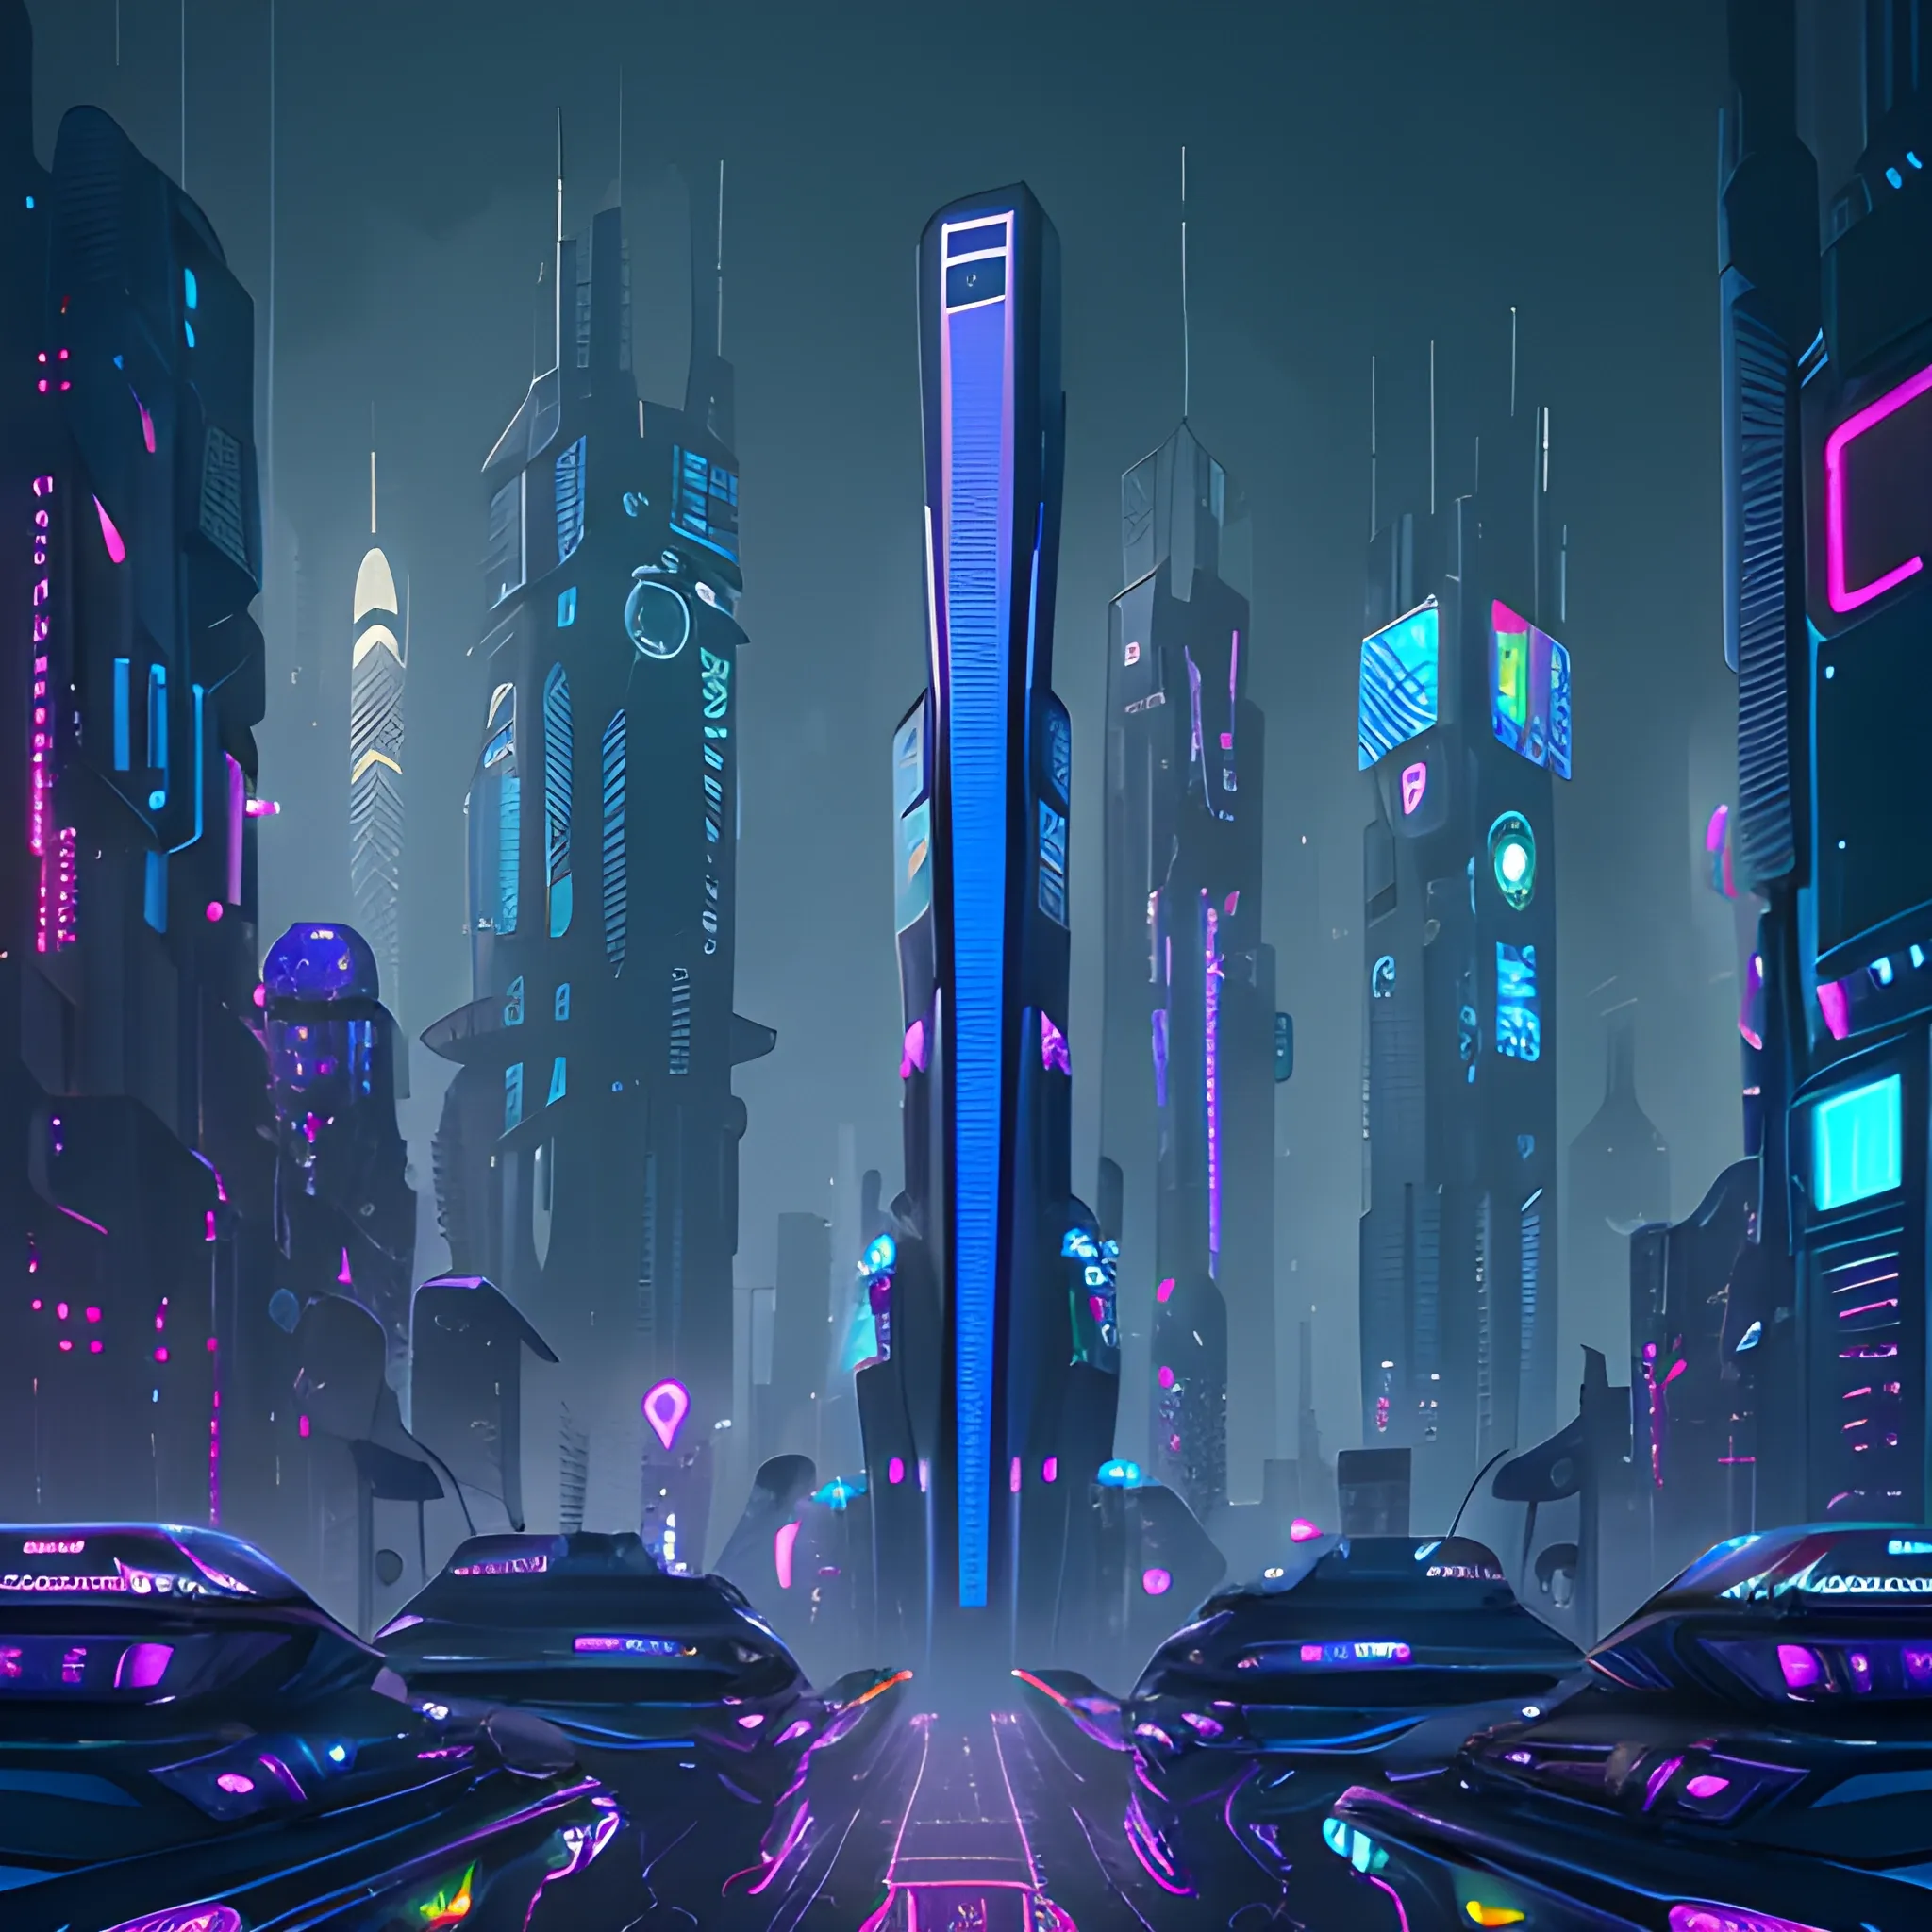 3D Generate a futuristic cyberpunk cityscape illustration with towering neon-lit skyscrapers, bustling flying vehicles, holographic billboards, and a dystopian atmosphere. The city should be shrouded in an eerie neon glow, with characters sporting high-tech augmentations and futuristic attire. Let the artwork capture the essence of a dark, technologically advanced metropolis, where humans and machines coexist in a futuristic, cybernetic world.